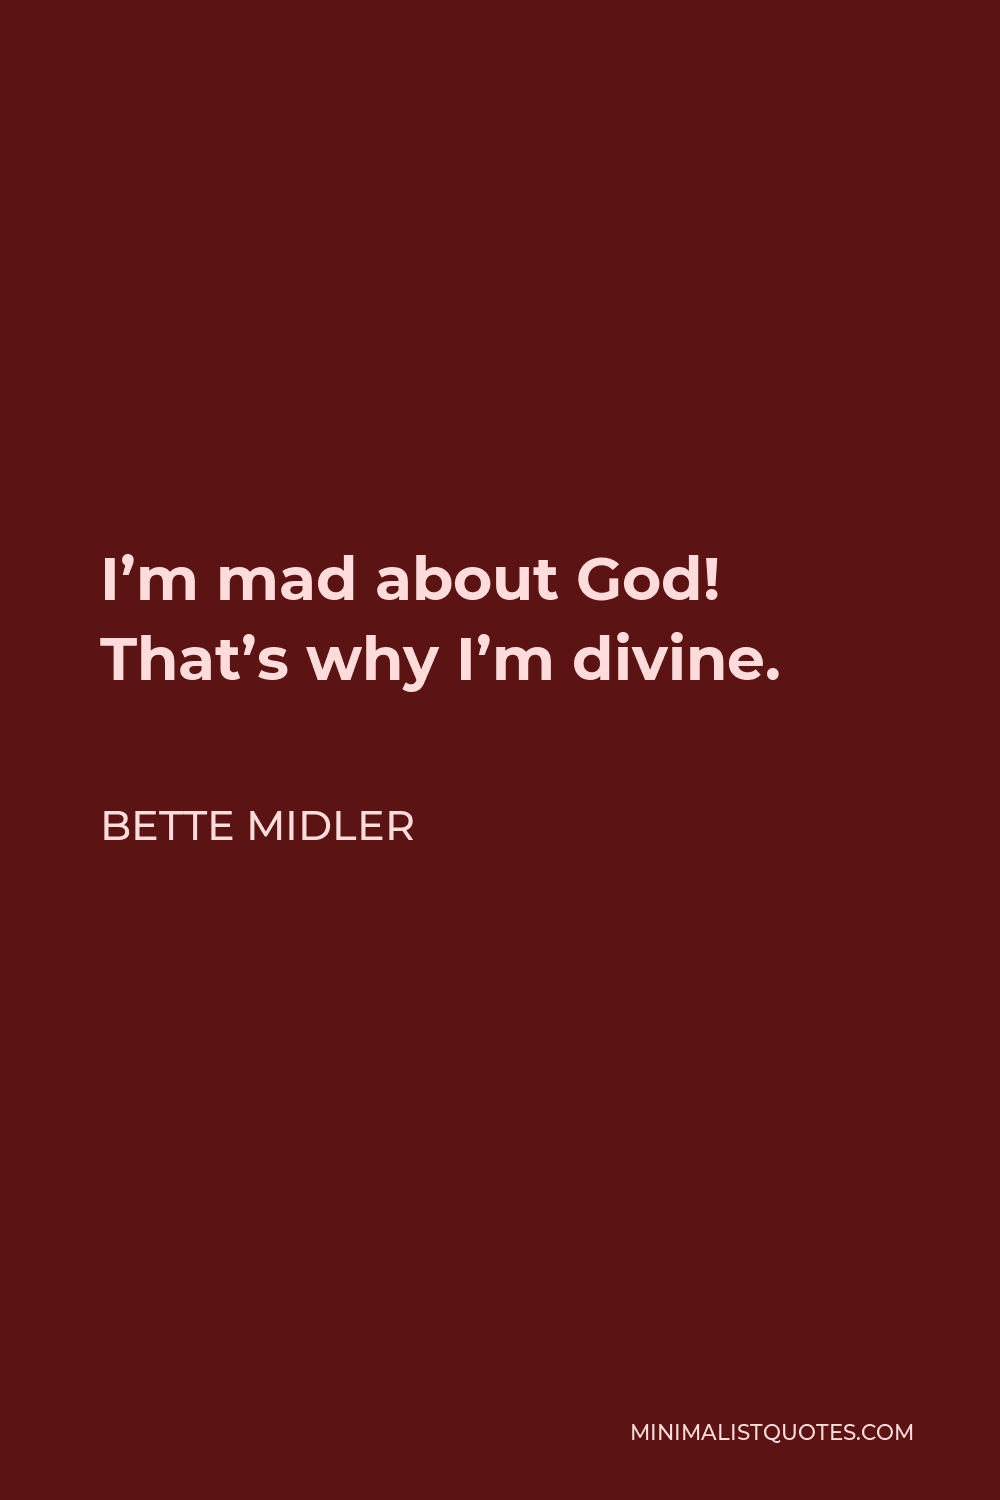 Bette Midler Quote - I’m mad about God! That’s why I’m divine.